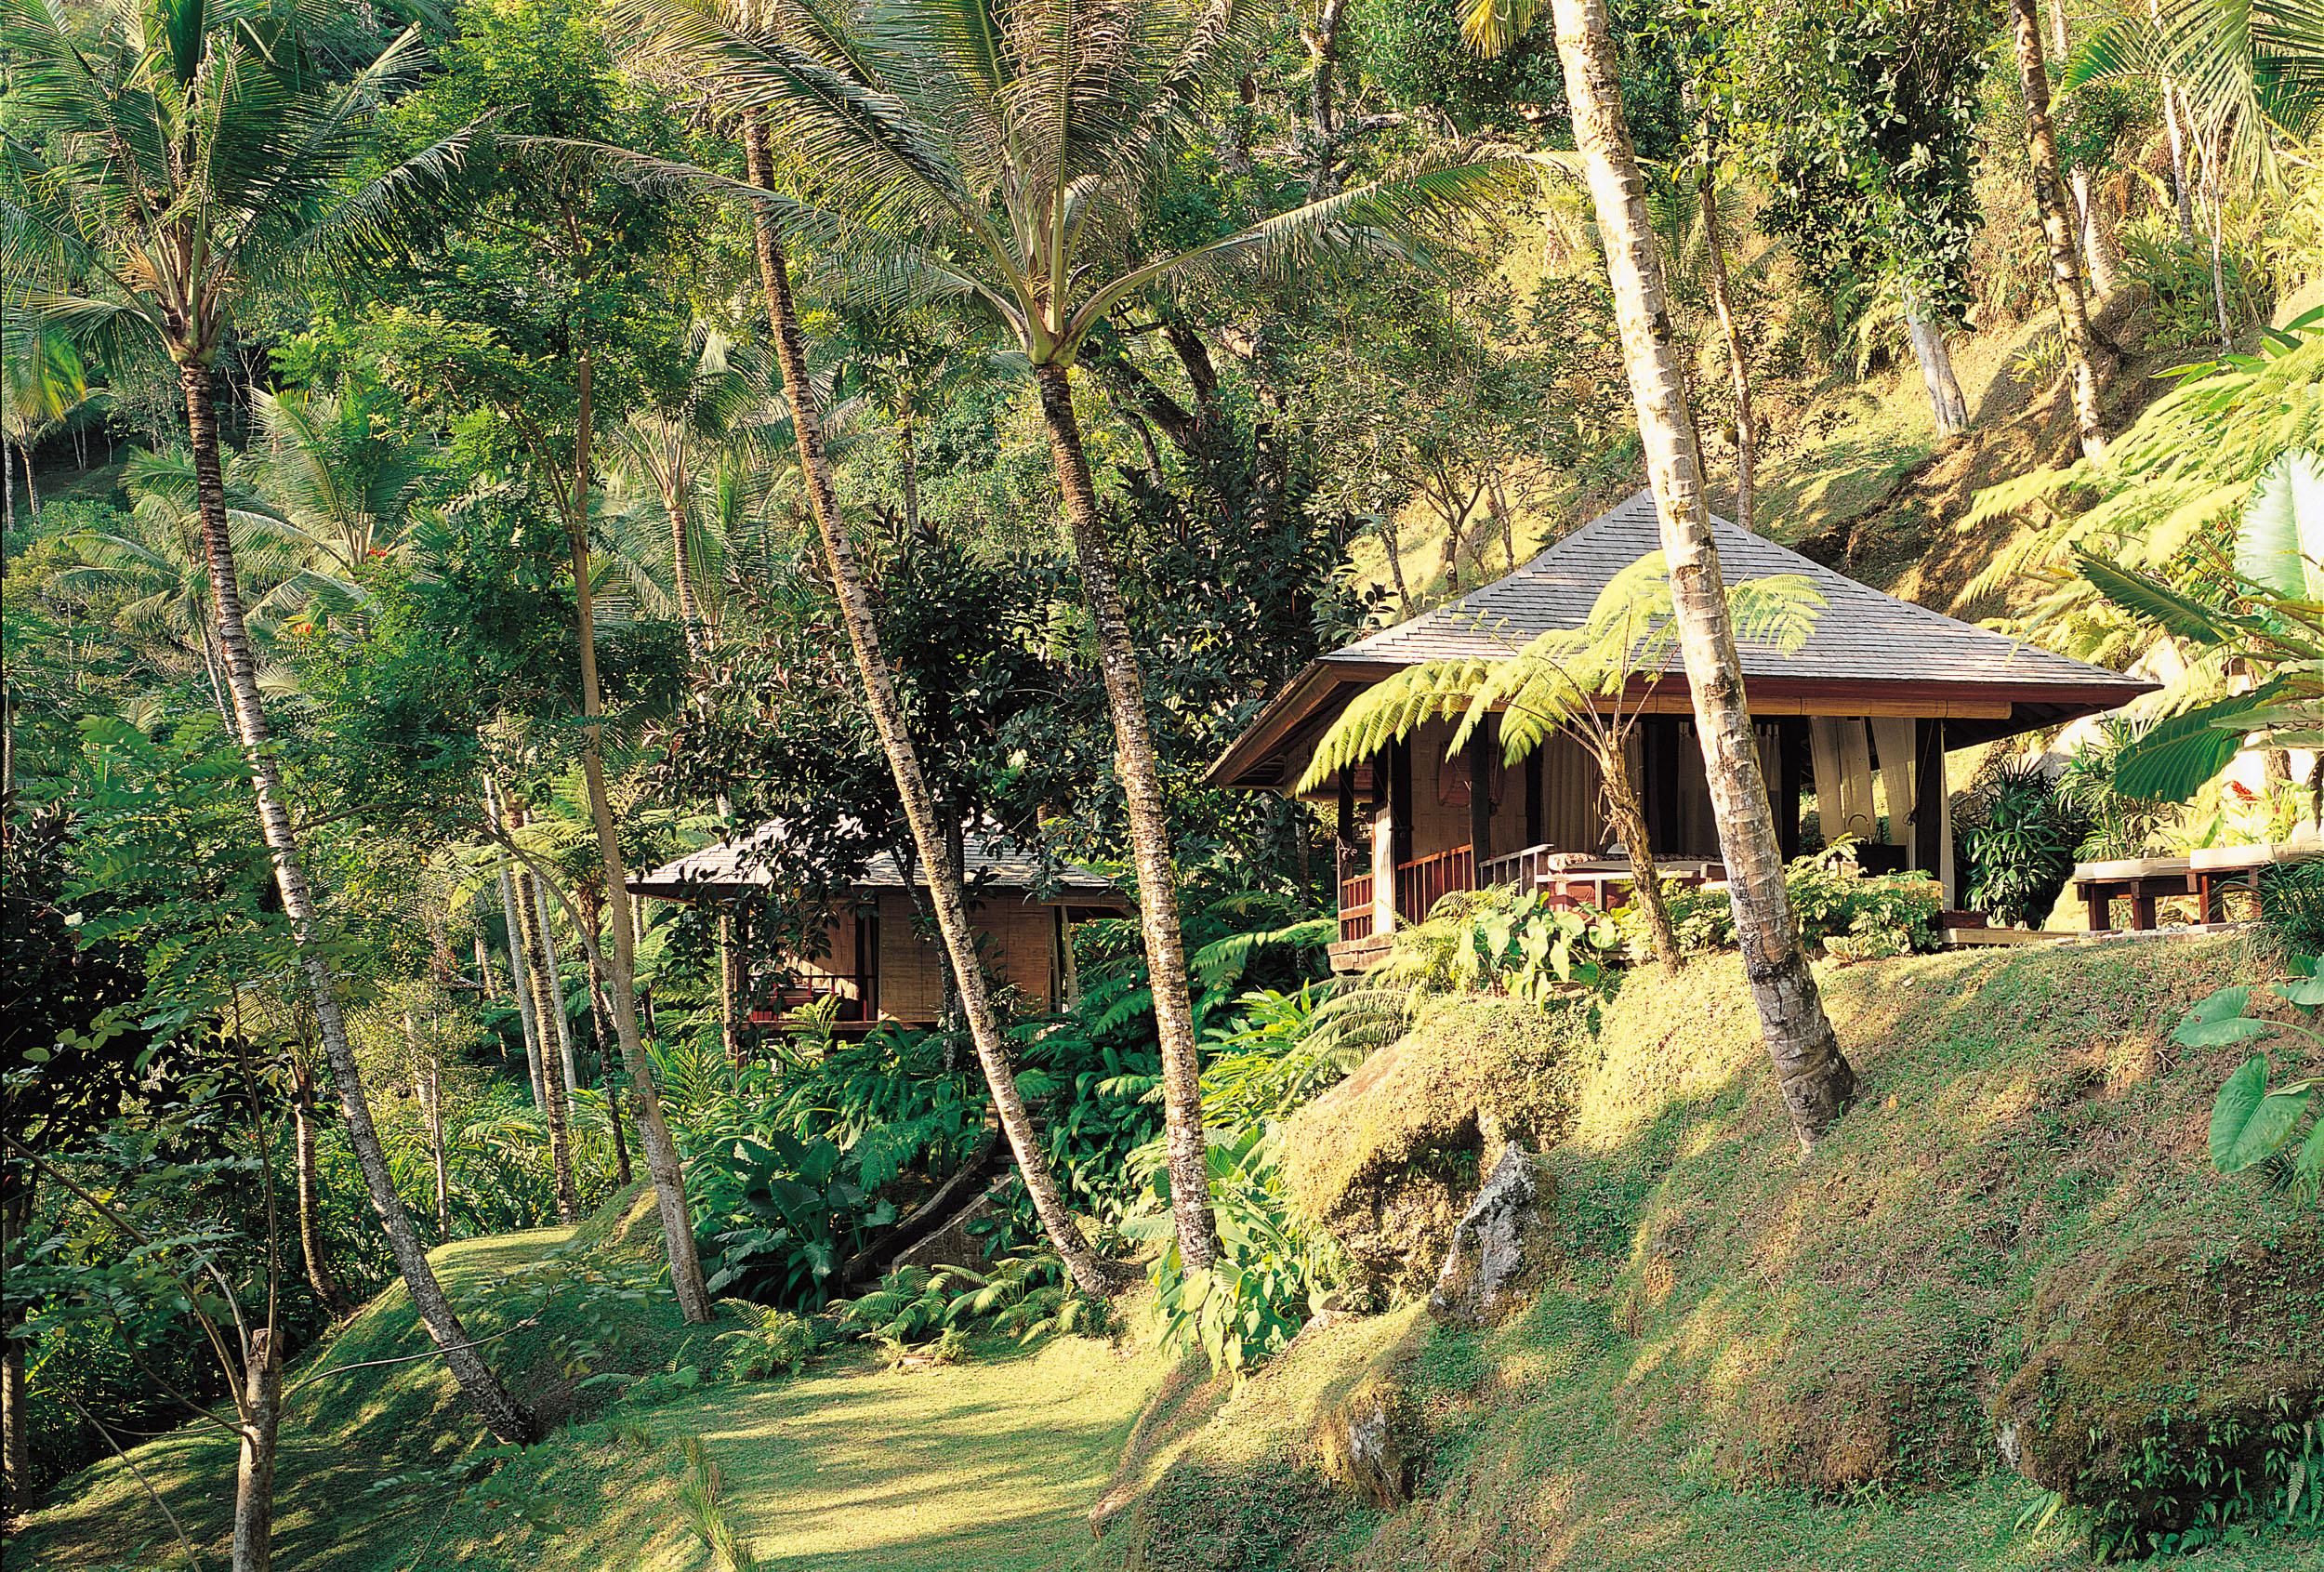 COMO Shambhala is situated in a remote location in Bali